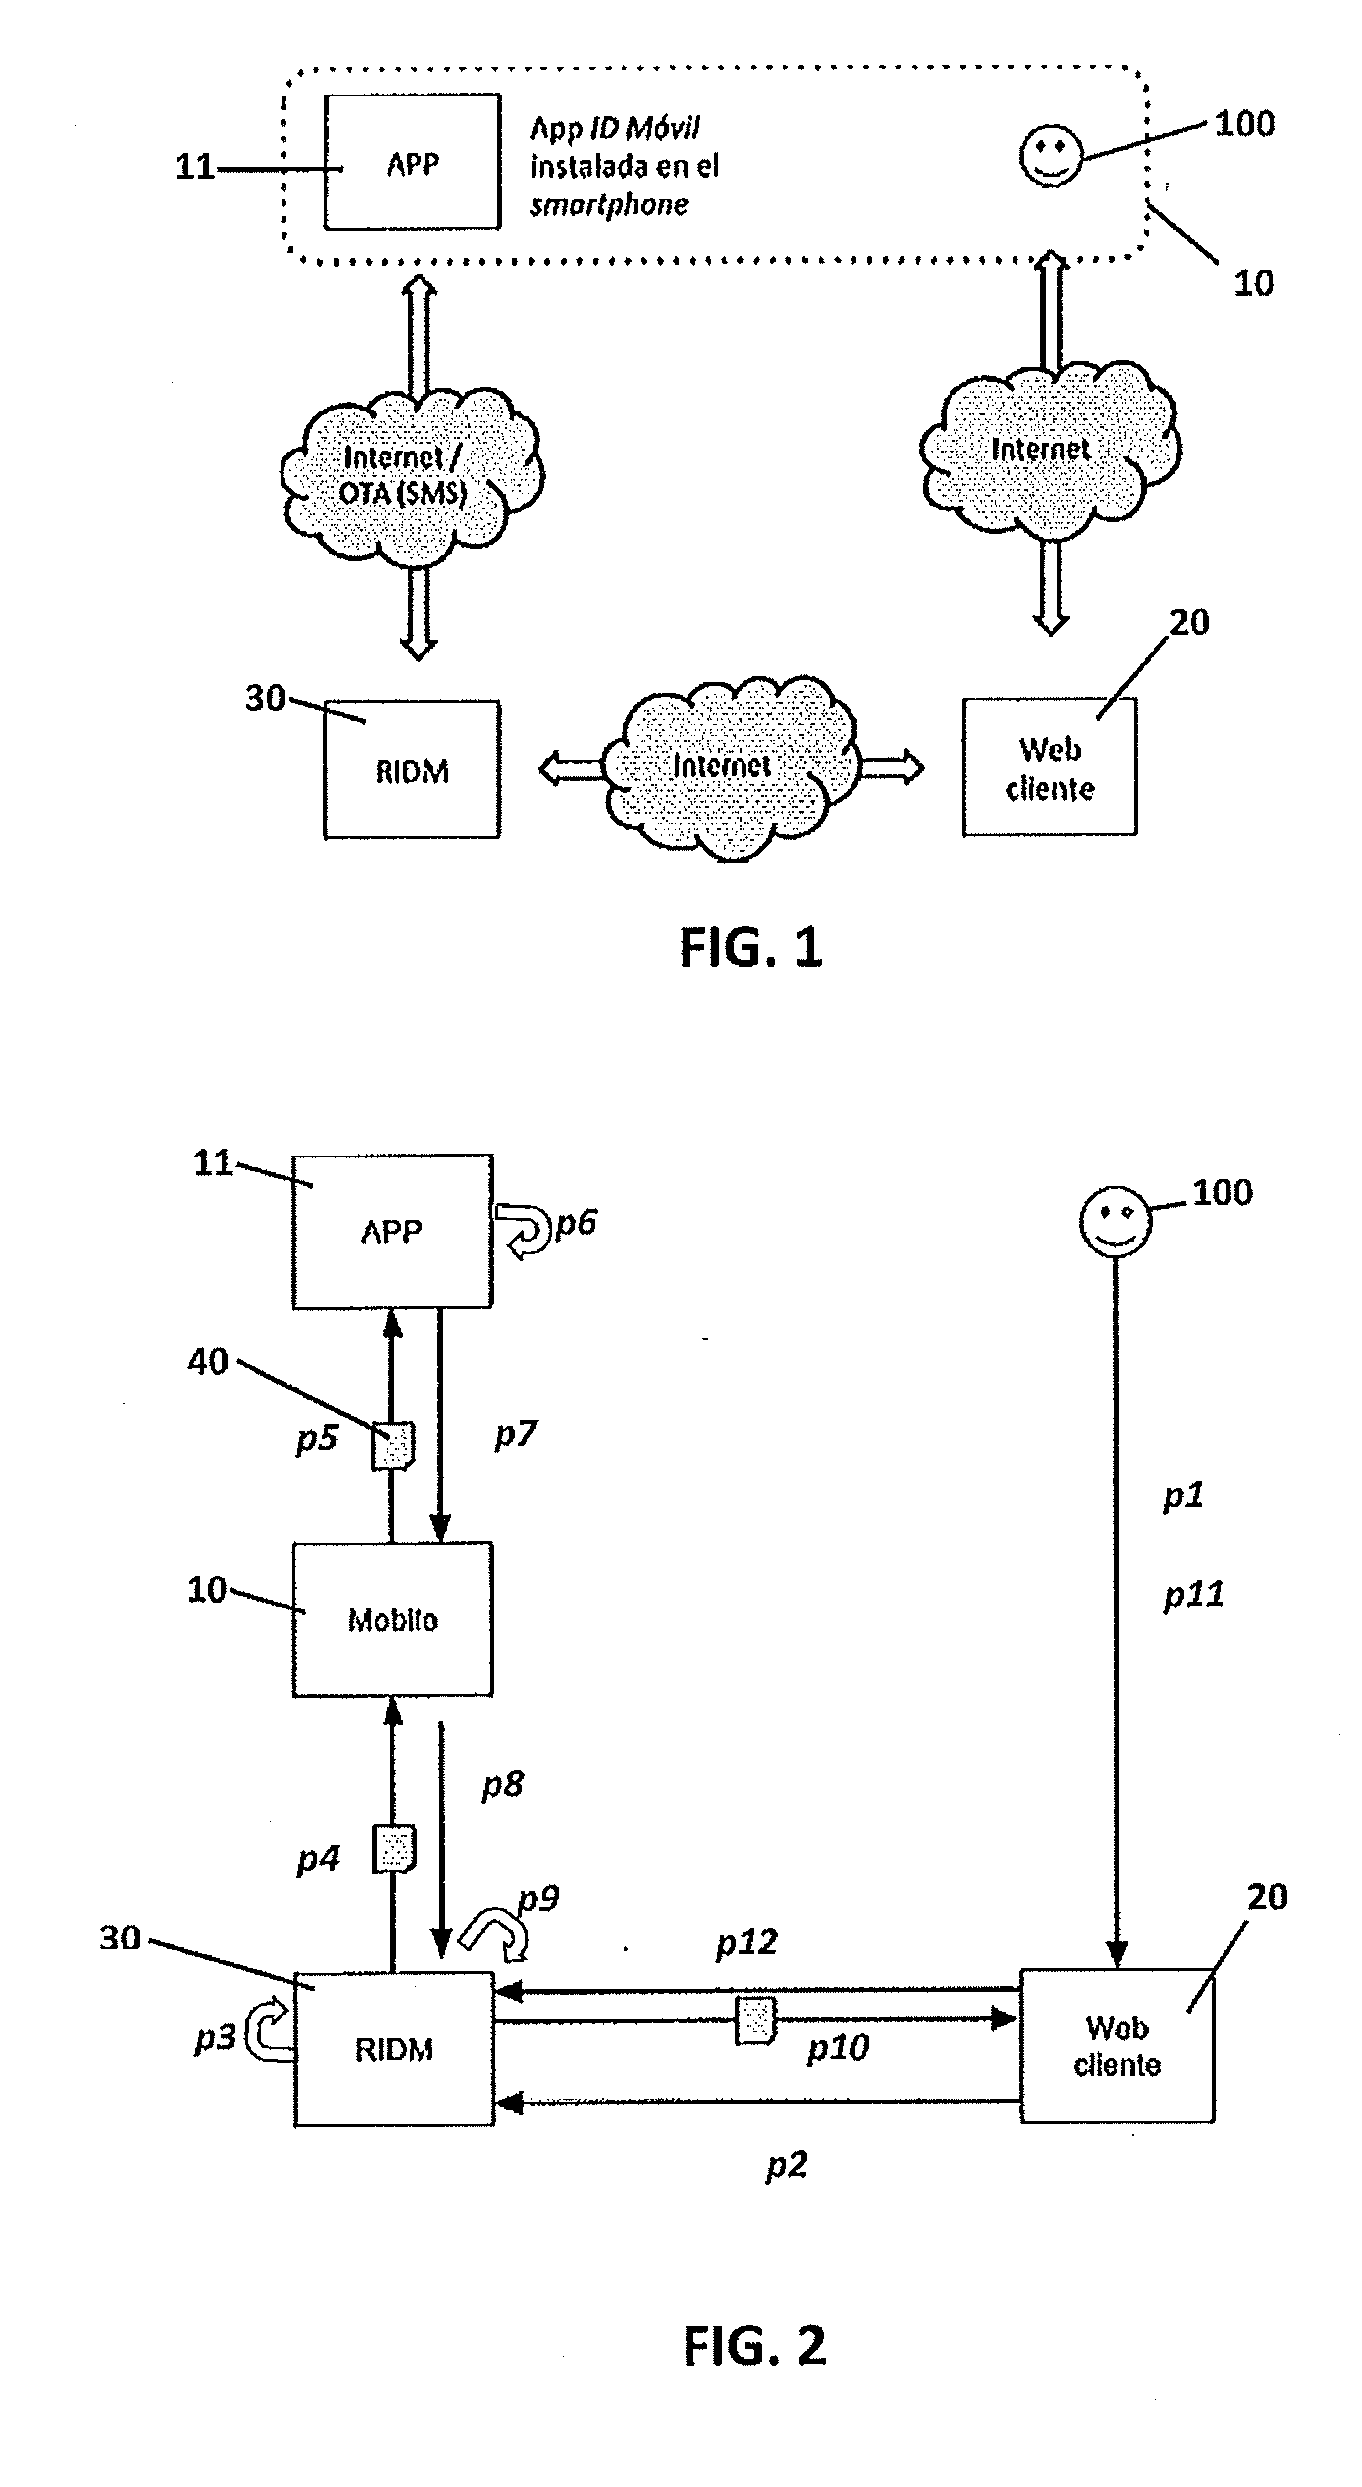 Procedure for generating a digital identity of a user of a mobile device, digital identity of the user, and authentication procedure using said digital identity of the user